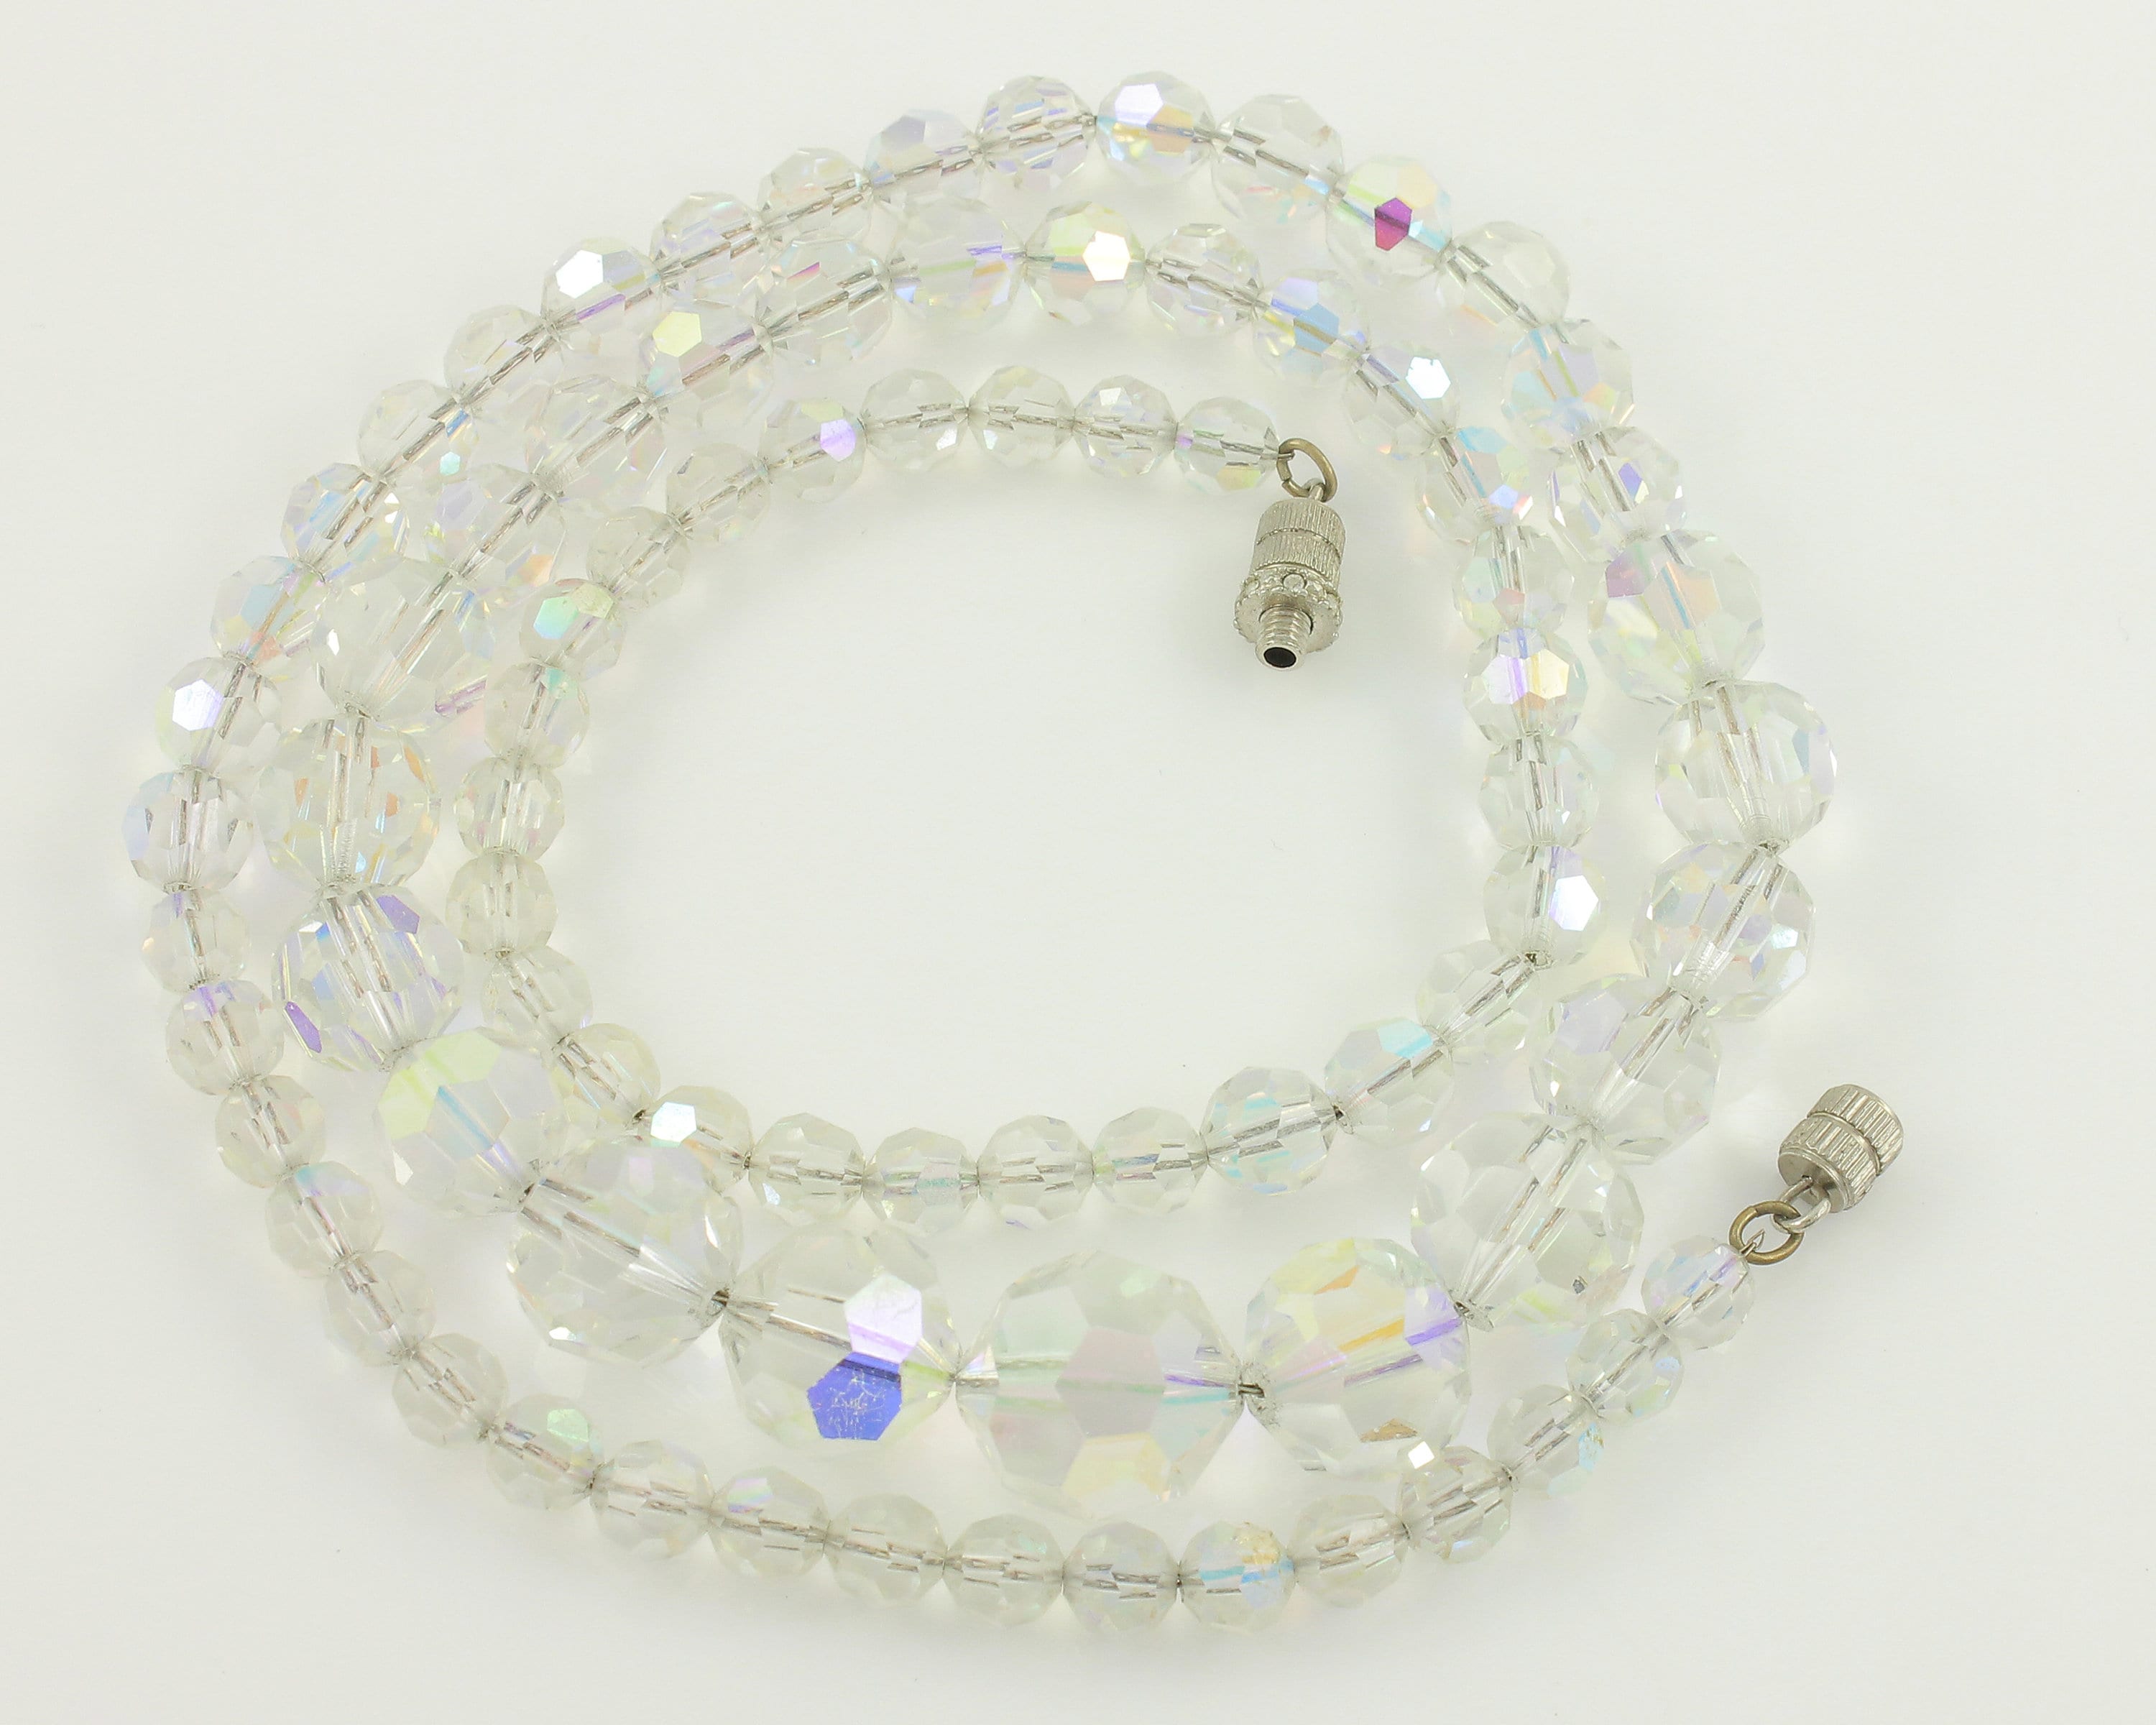 Vintage Opal Bead & Rock Crystal Necklace with 9ct White Gold Clasp  1920/1930s - 23205 / LA473232 | LoveAntiques.com